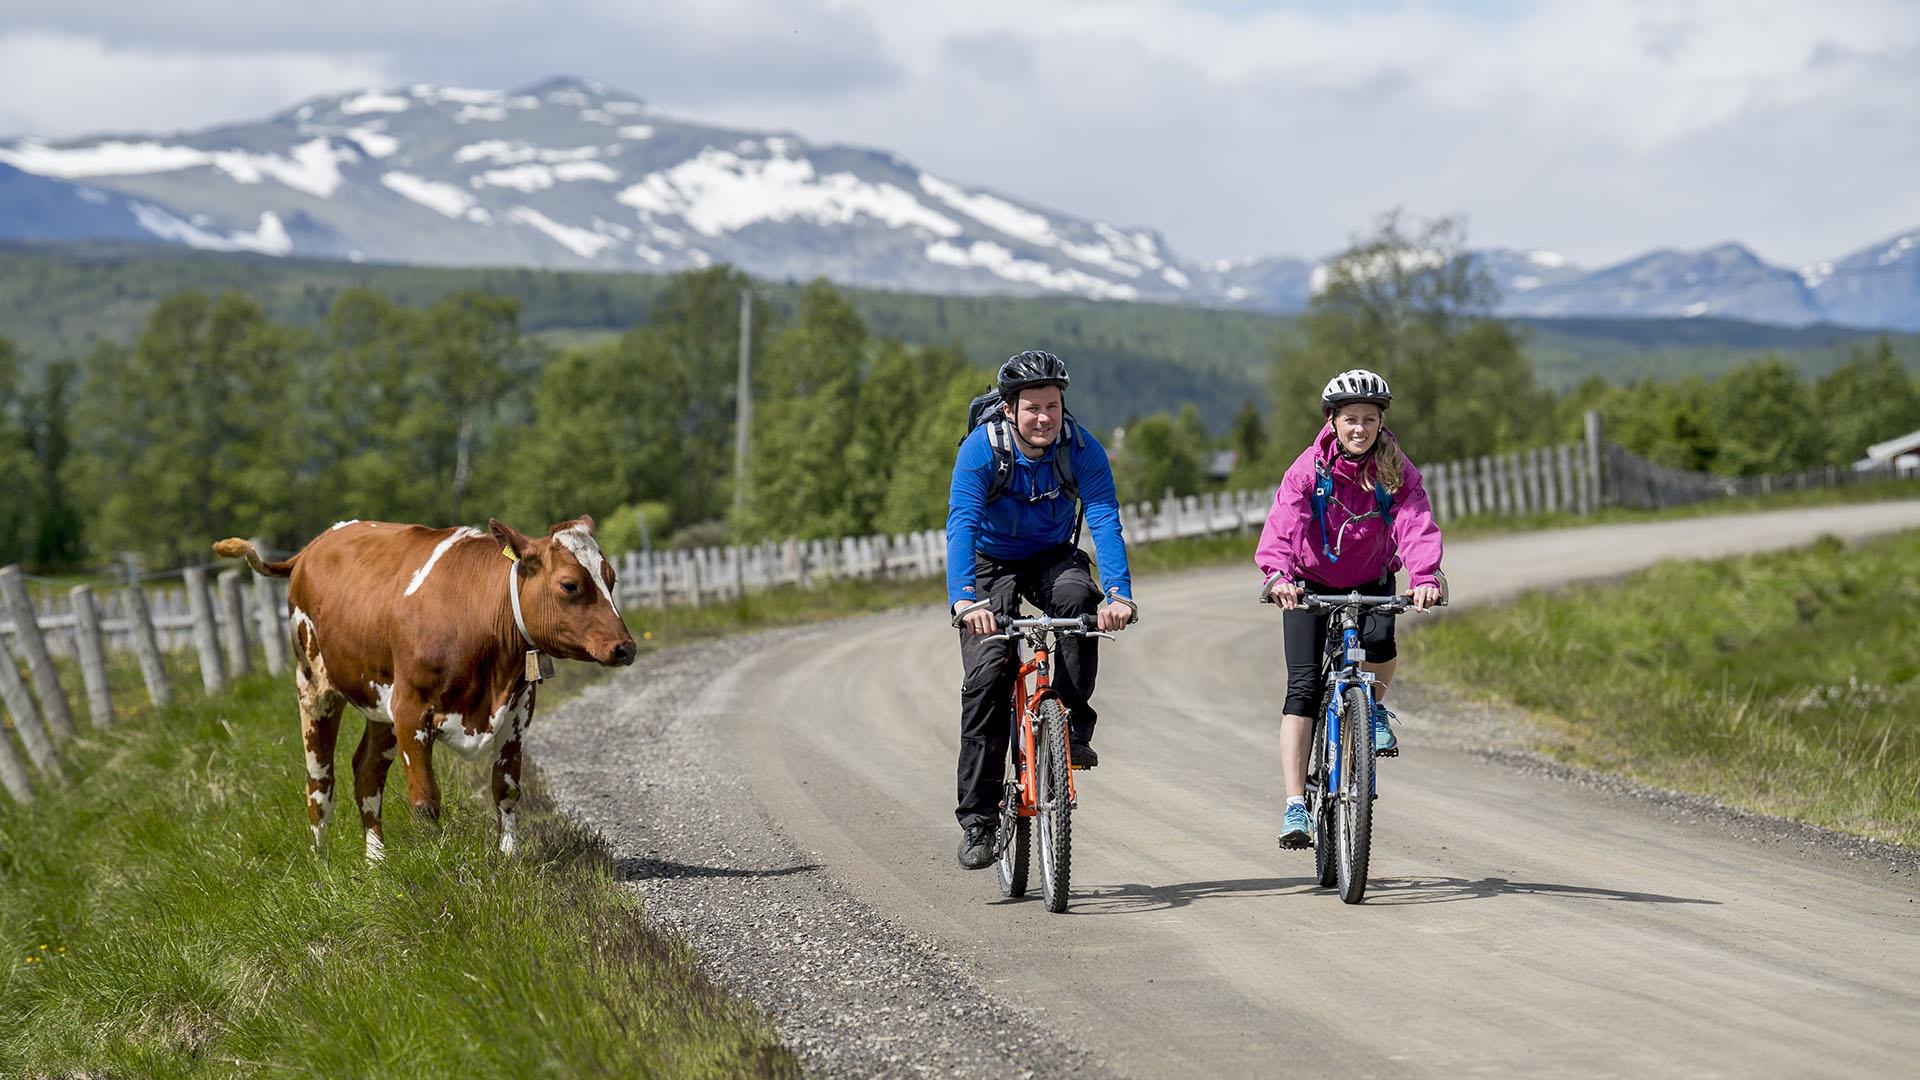 Two cyclists pass a free-grazing cow along a mountain farm road. Mountains with snow can be seen in the background.